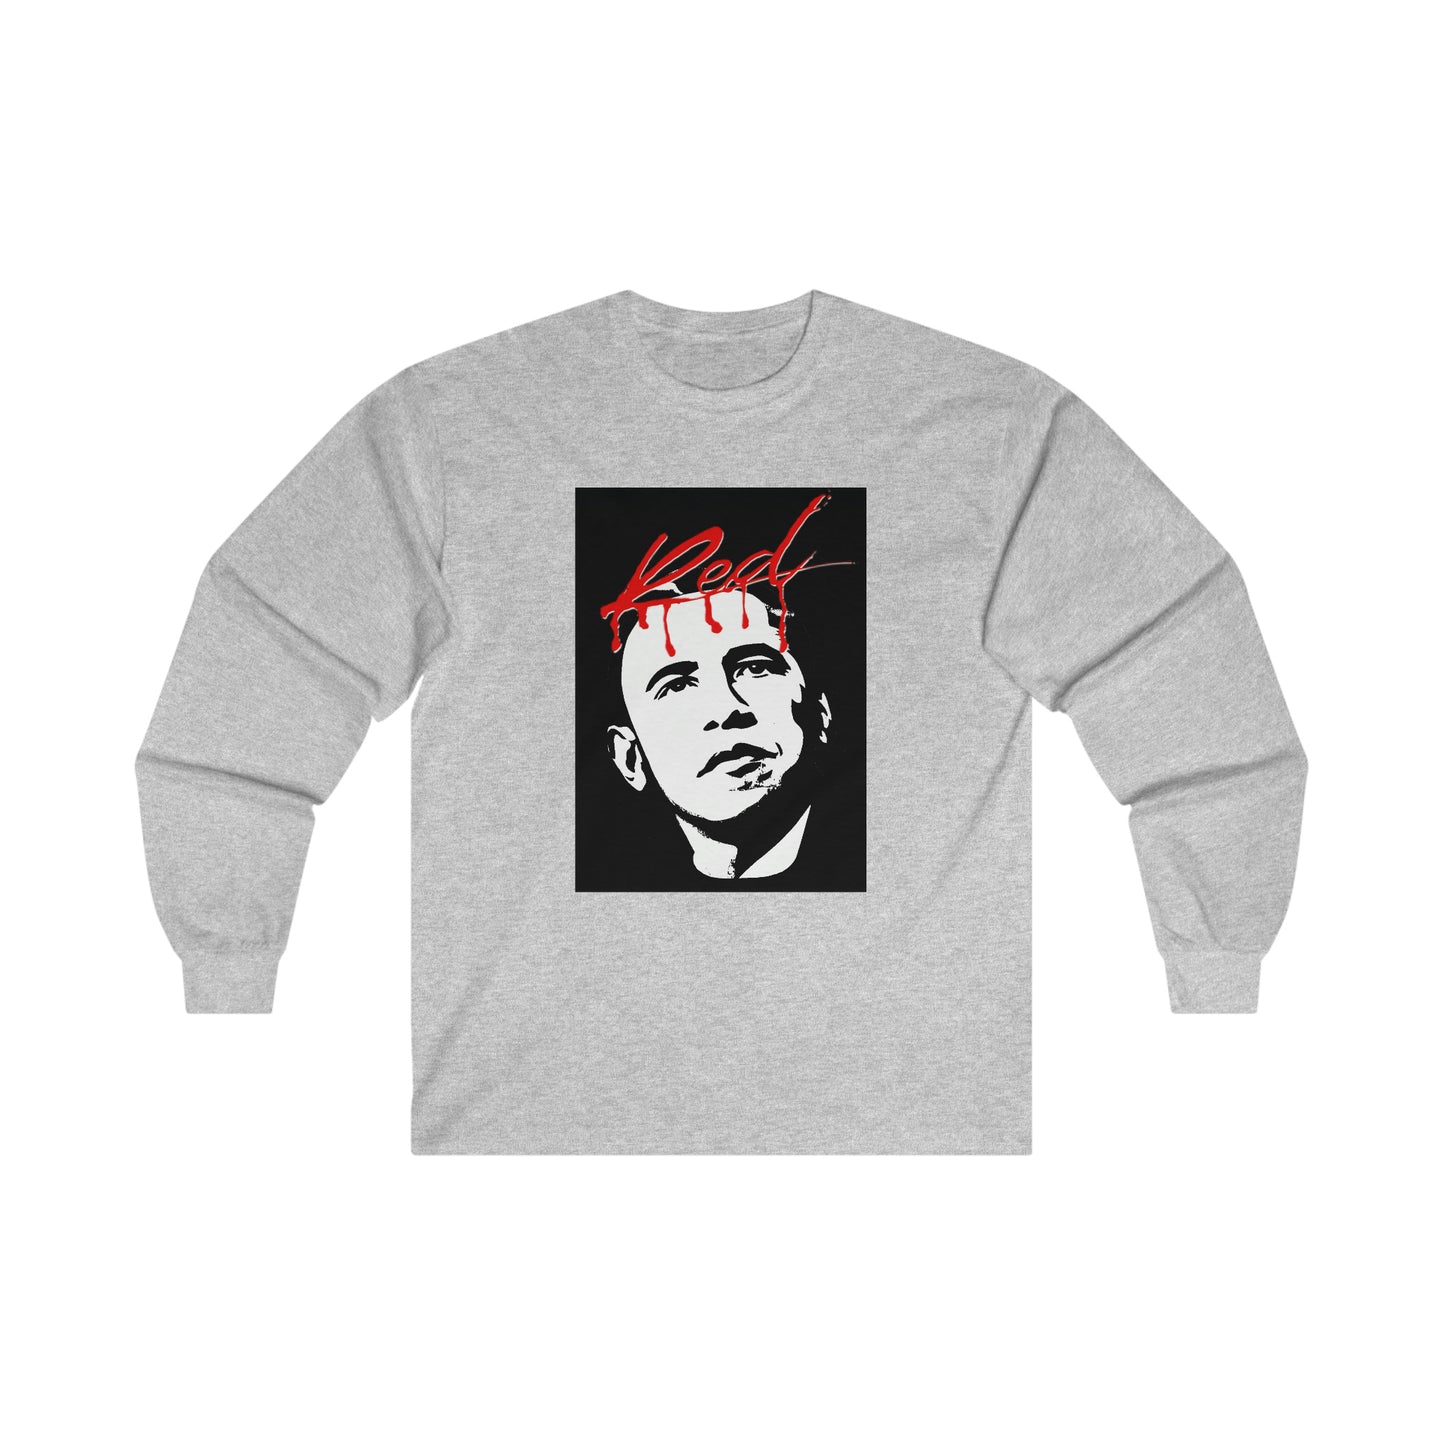 Obama x Carti WLR - Ultra Cotton Long Sleeve Tee - All Colors